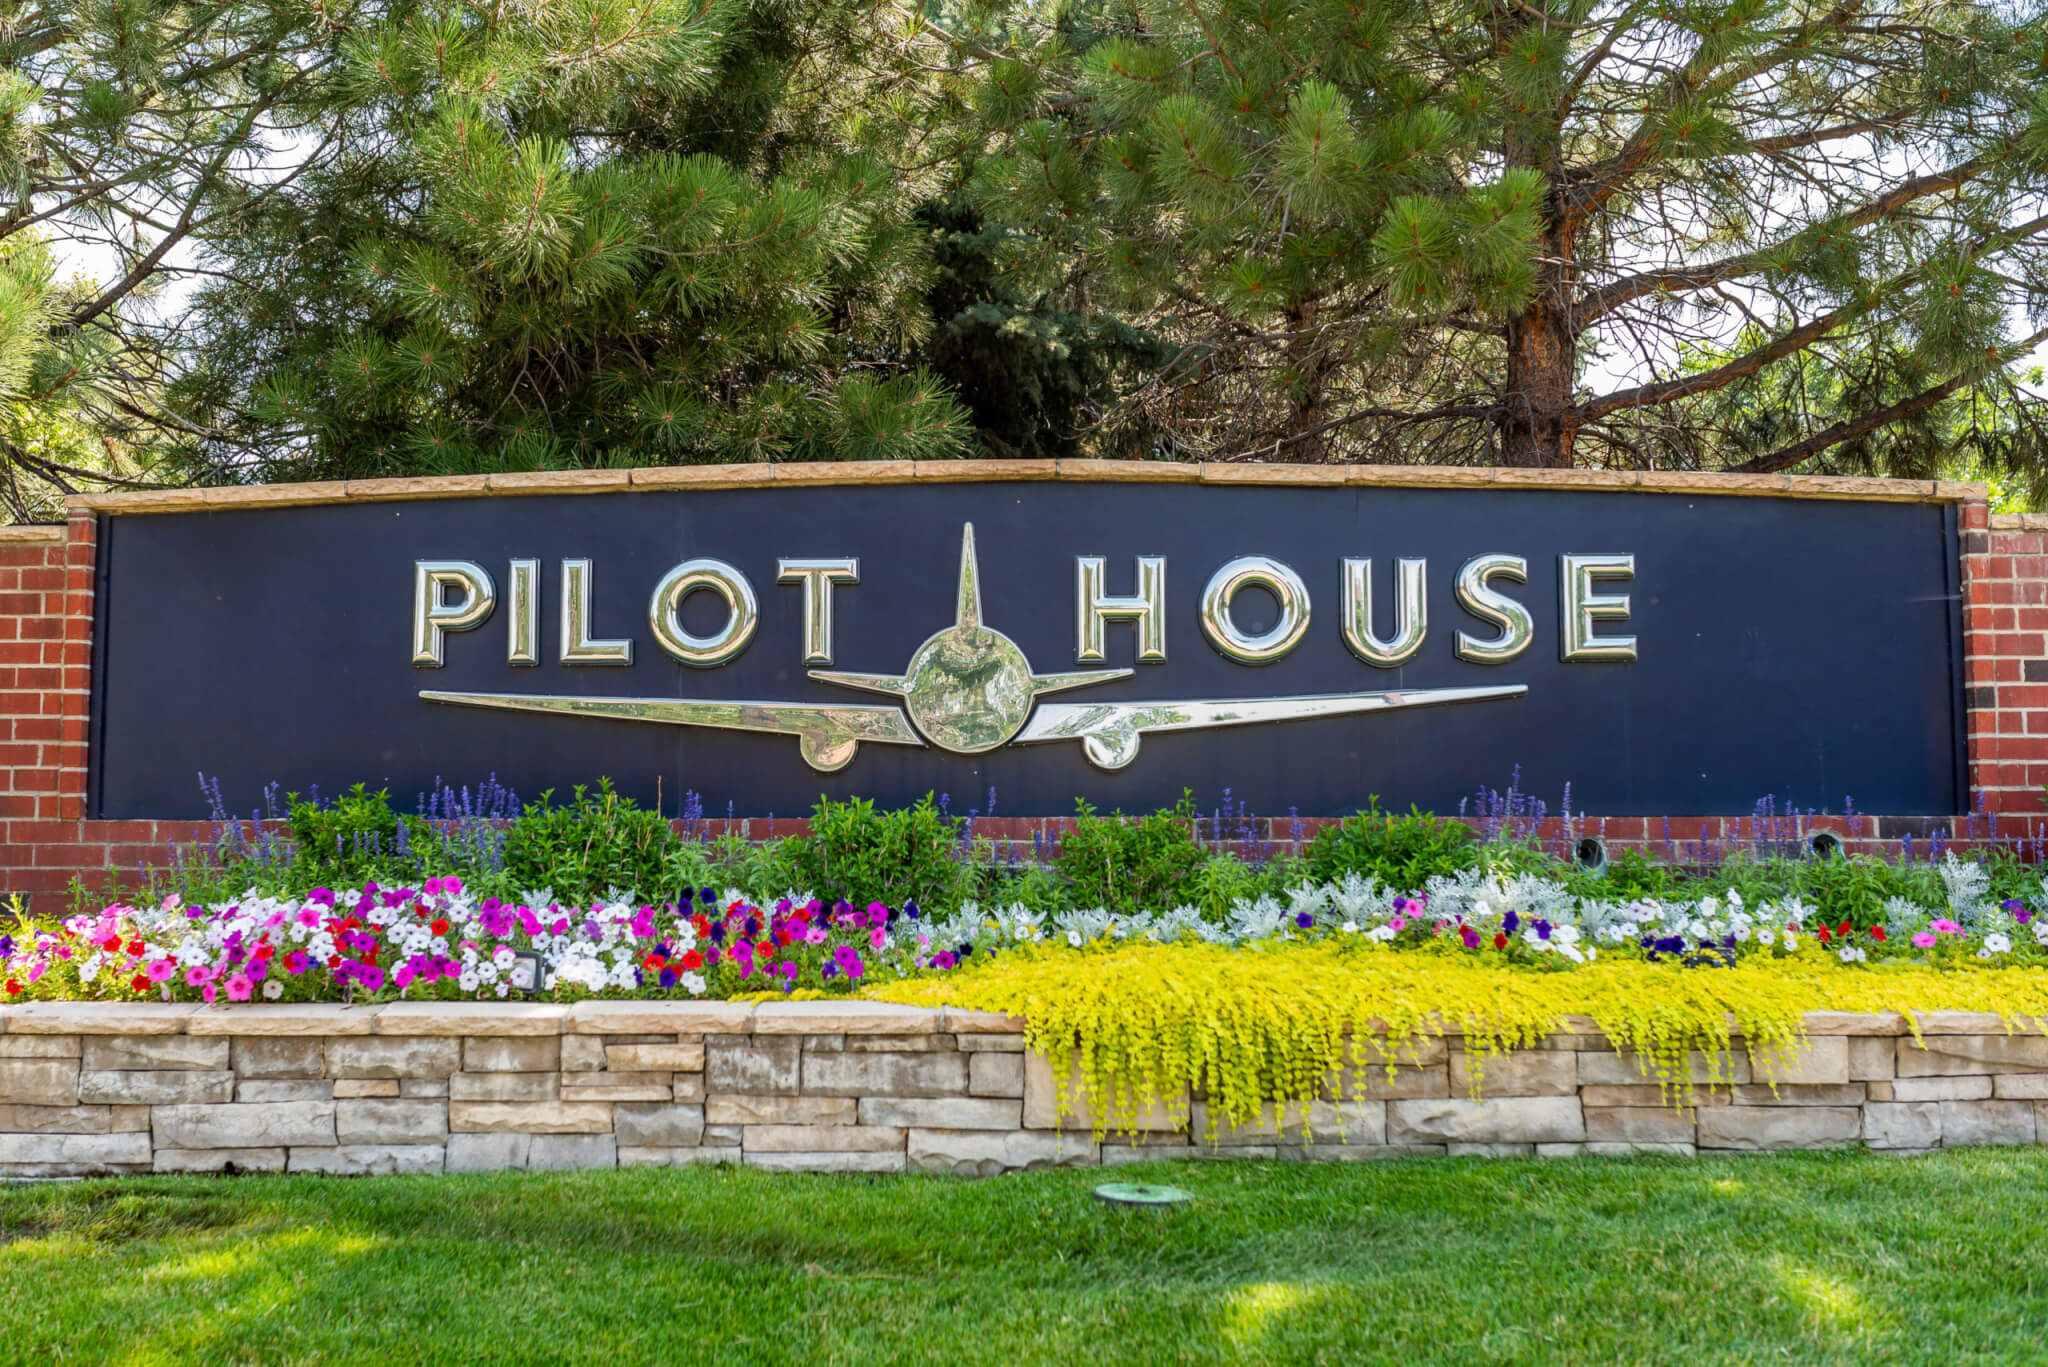 A big stacked stone flower pot is filled with creeper plants and colour flower plants in front of the pilot house sign